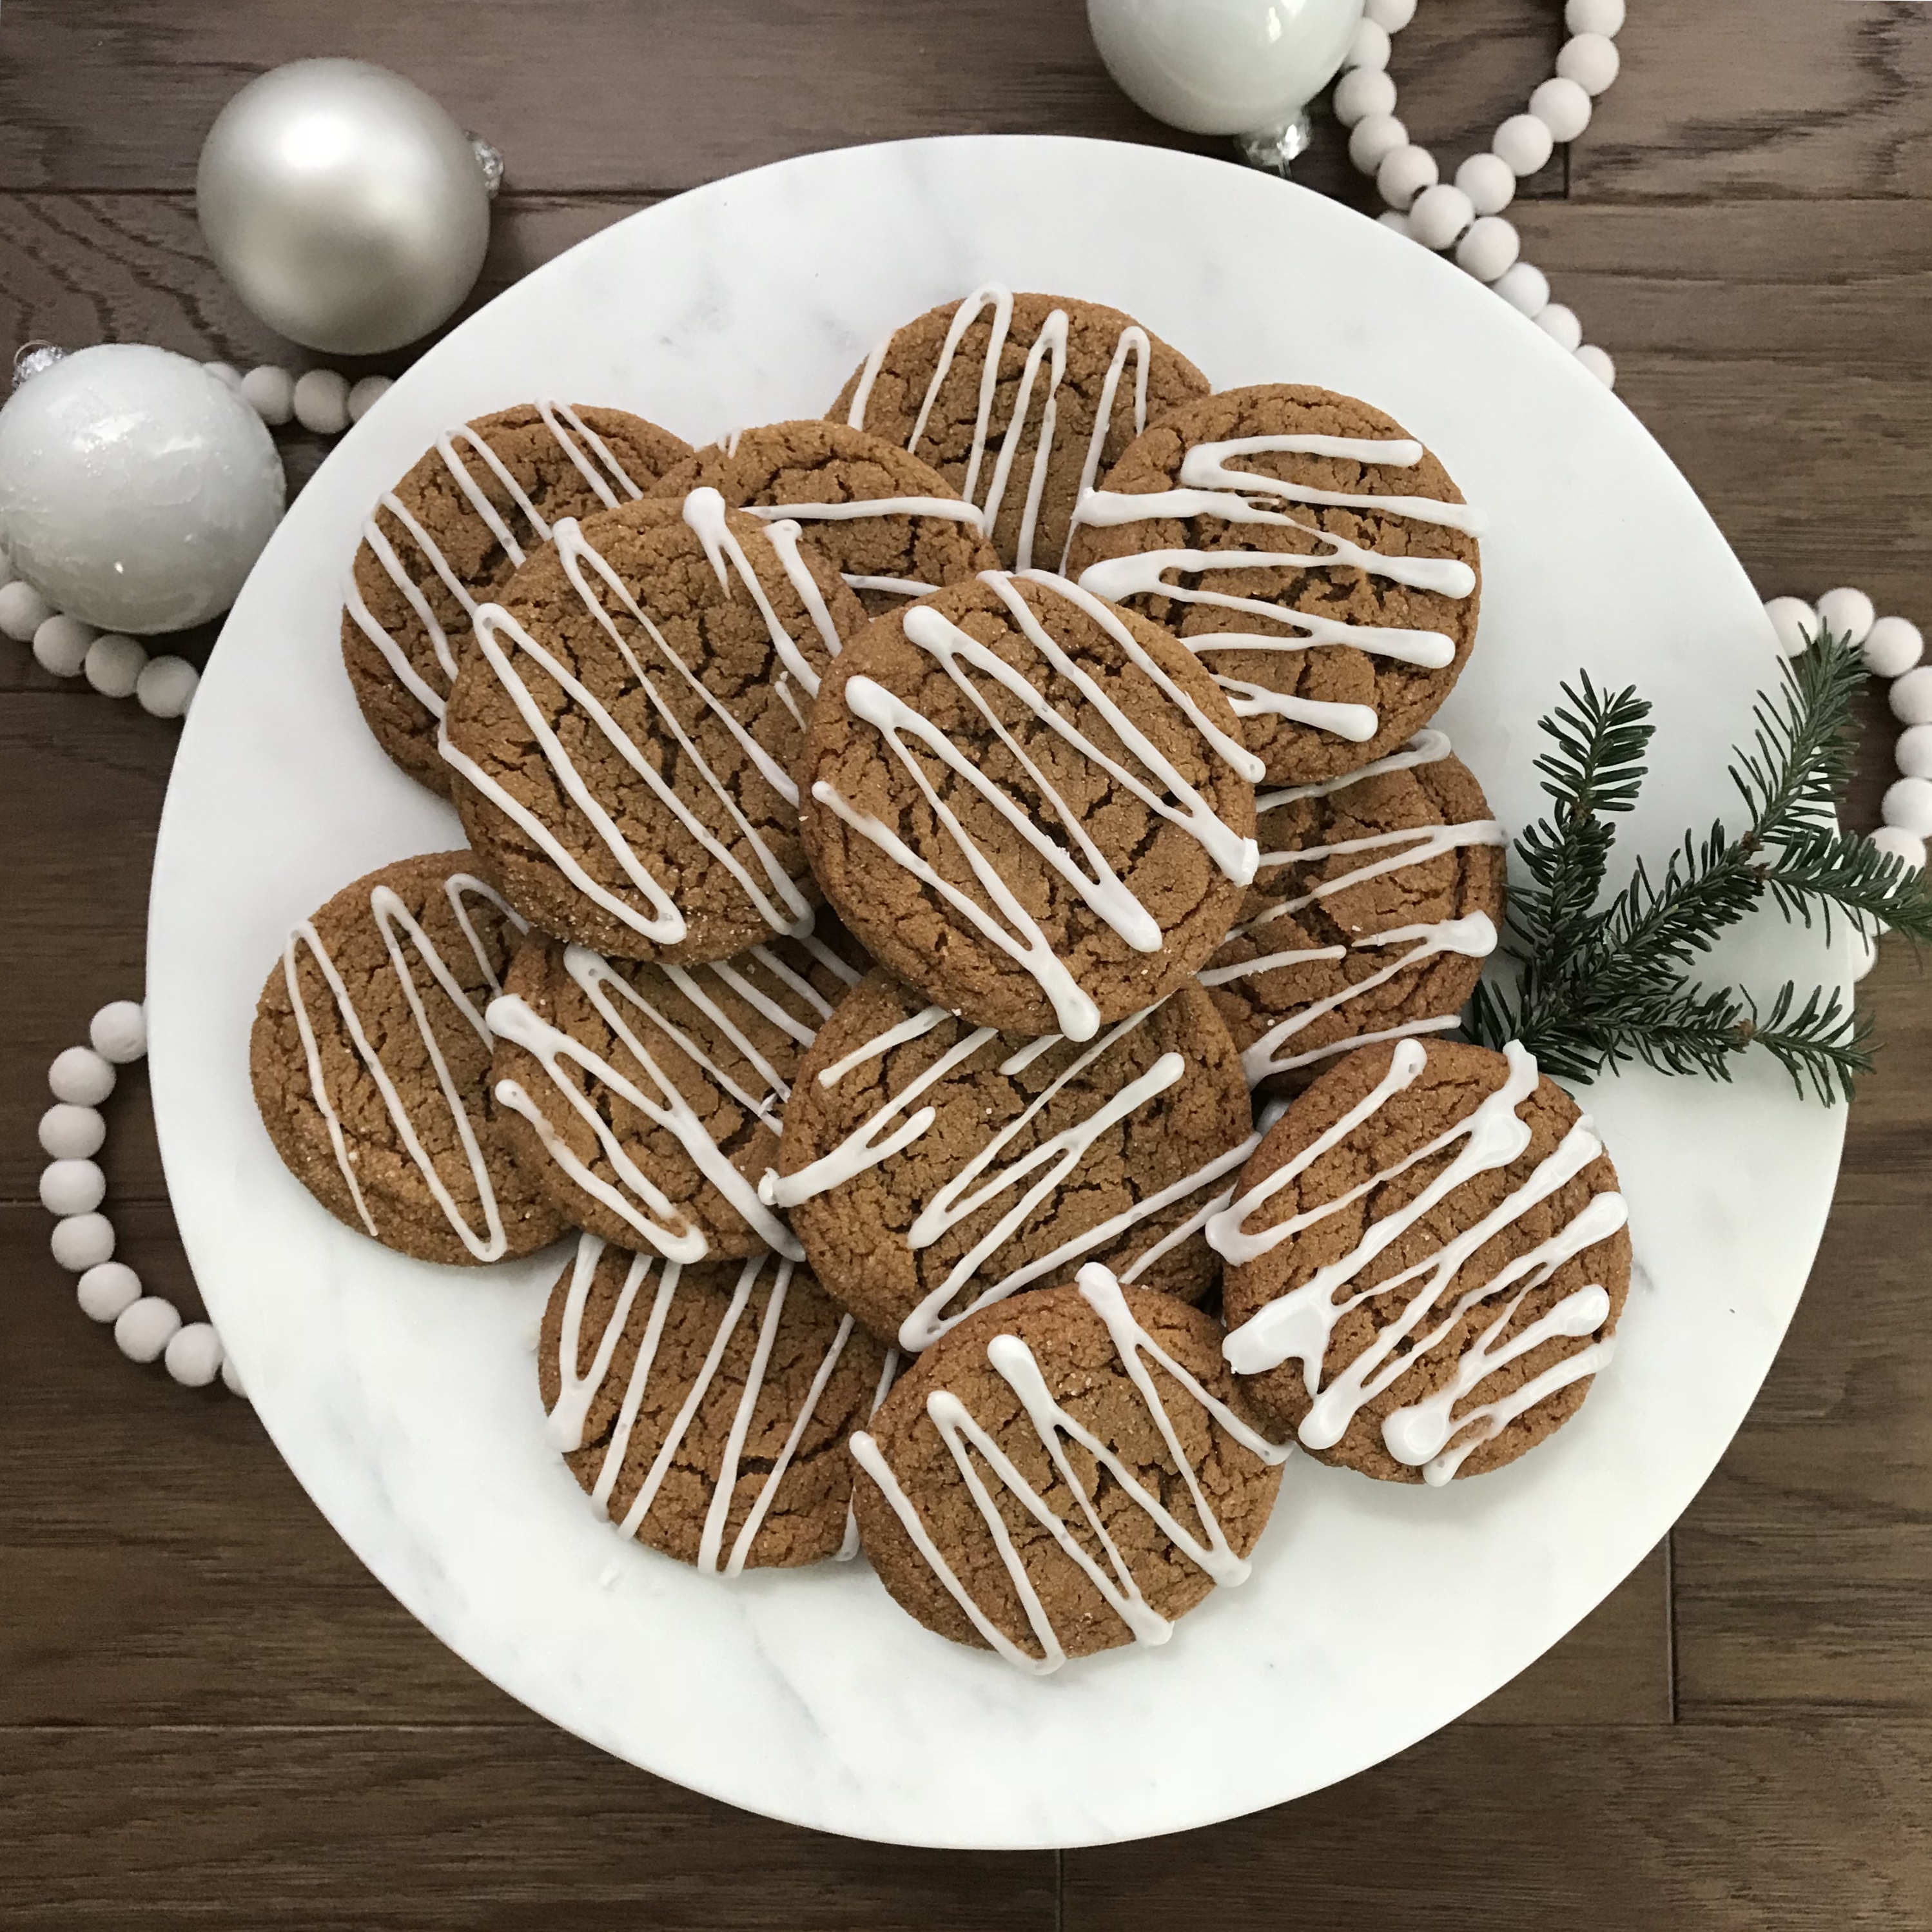 Iced ginger cookies on a white plate next to white ornaments and pine bows.